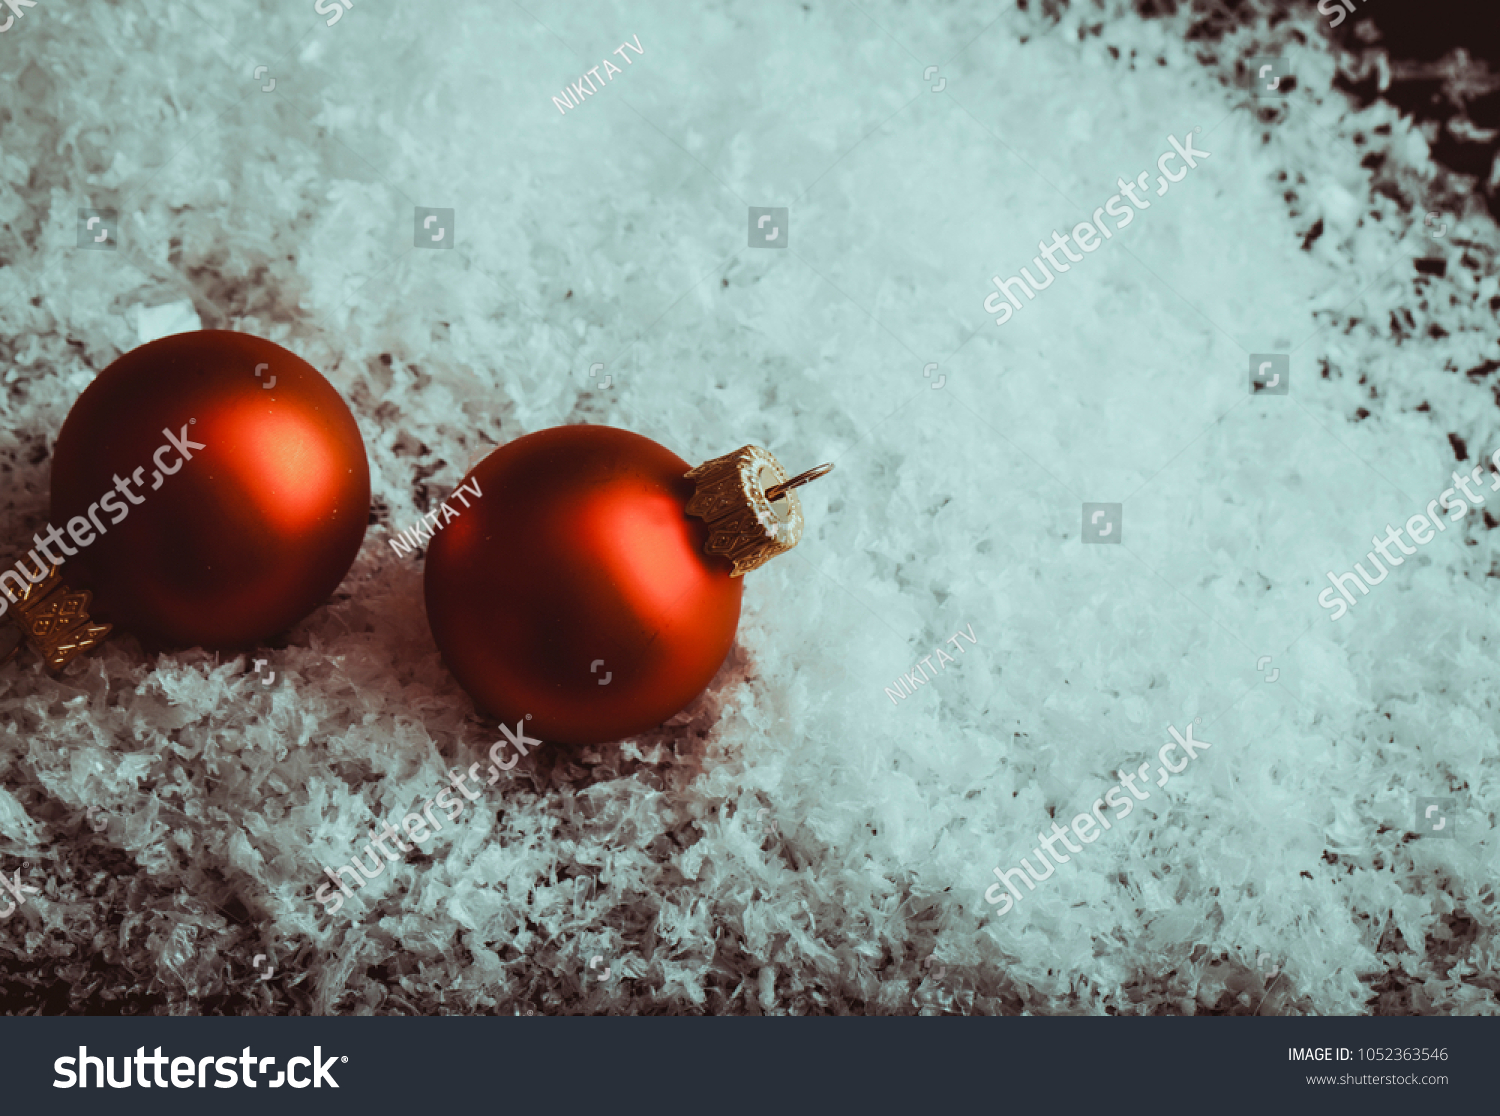 Two Small red Christmas balls. Two Red mate Christmas balls in snow and blur photo studio background table #1052363546